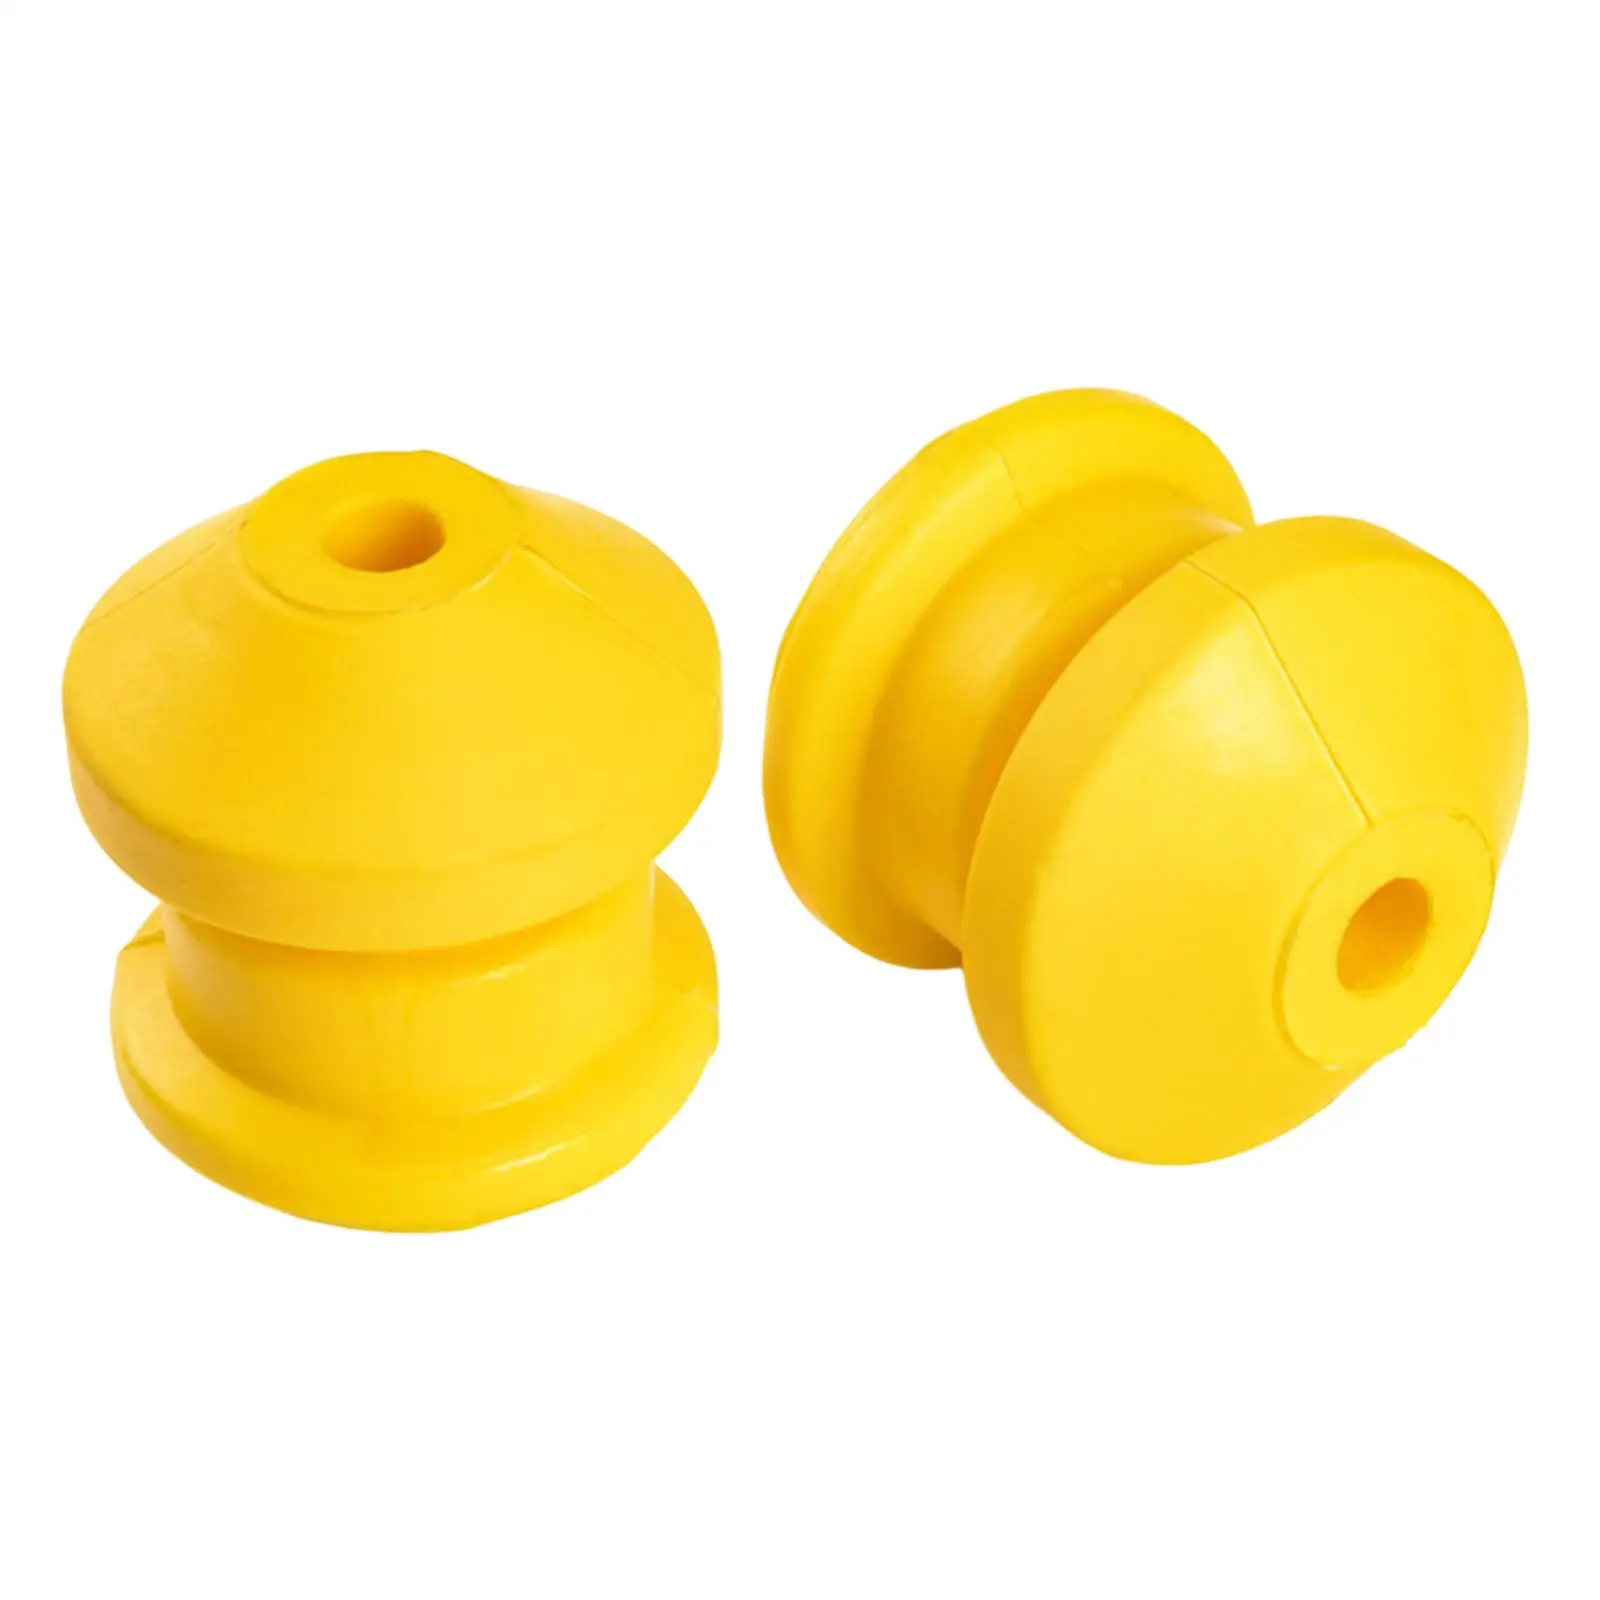 2 Pieces Bumper Stop Absorber 15783030 Replace Durable Easily Install Buffer Block Rubber Bump Suspension for Hummer H3